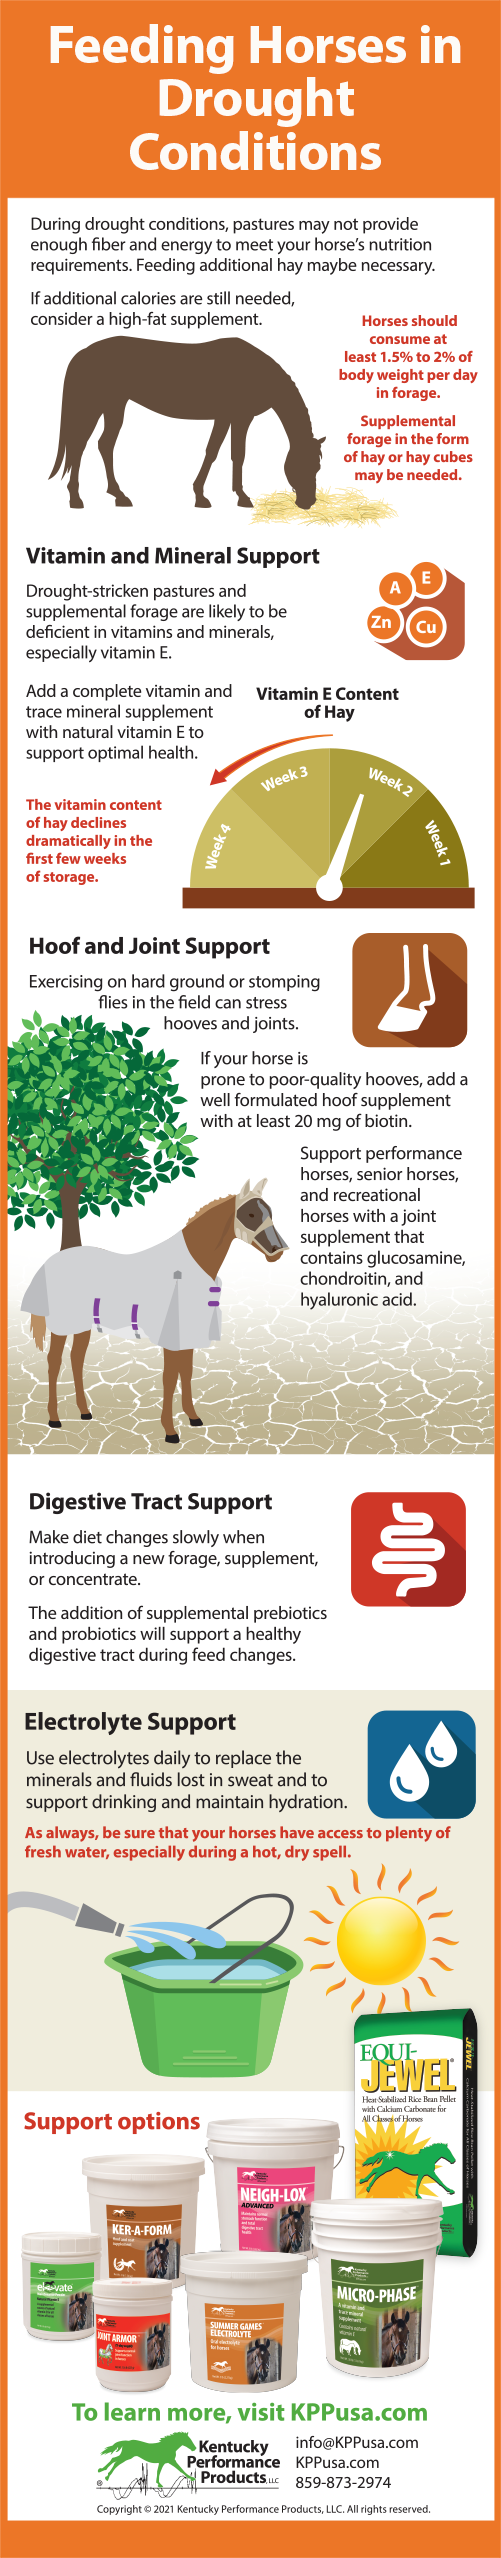 Feeding horses in drought conditions infographic